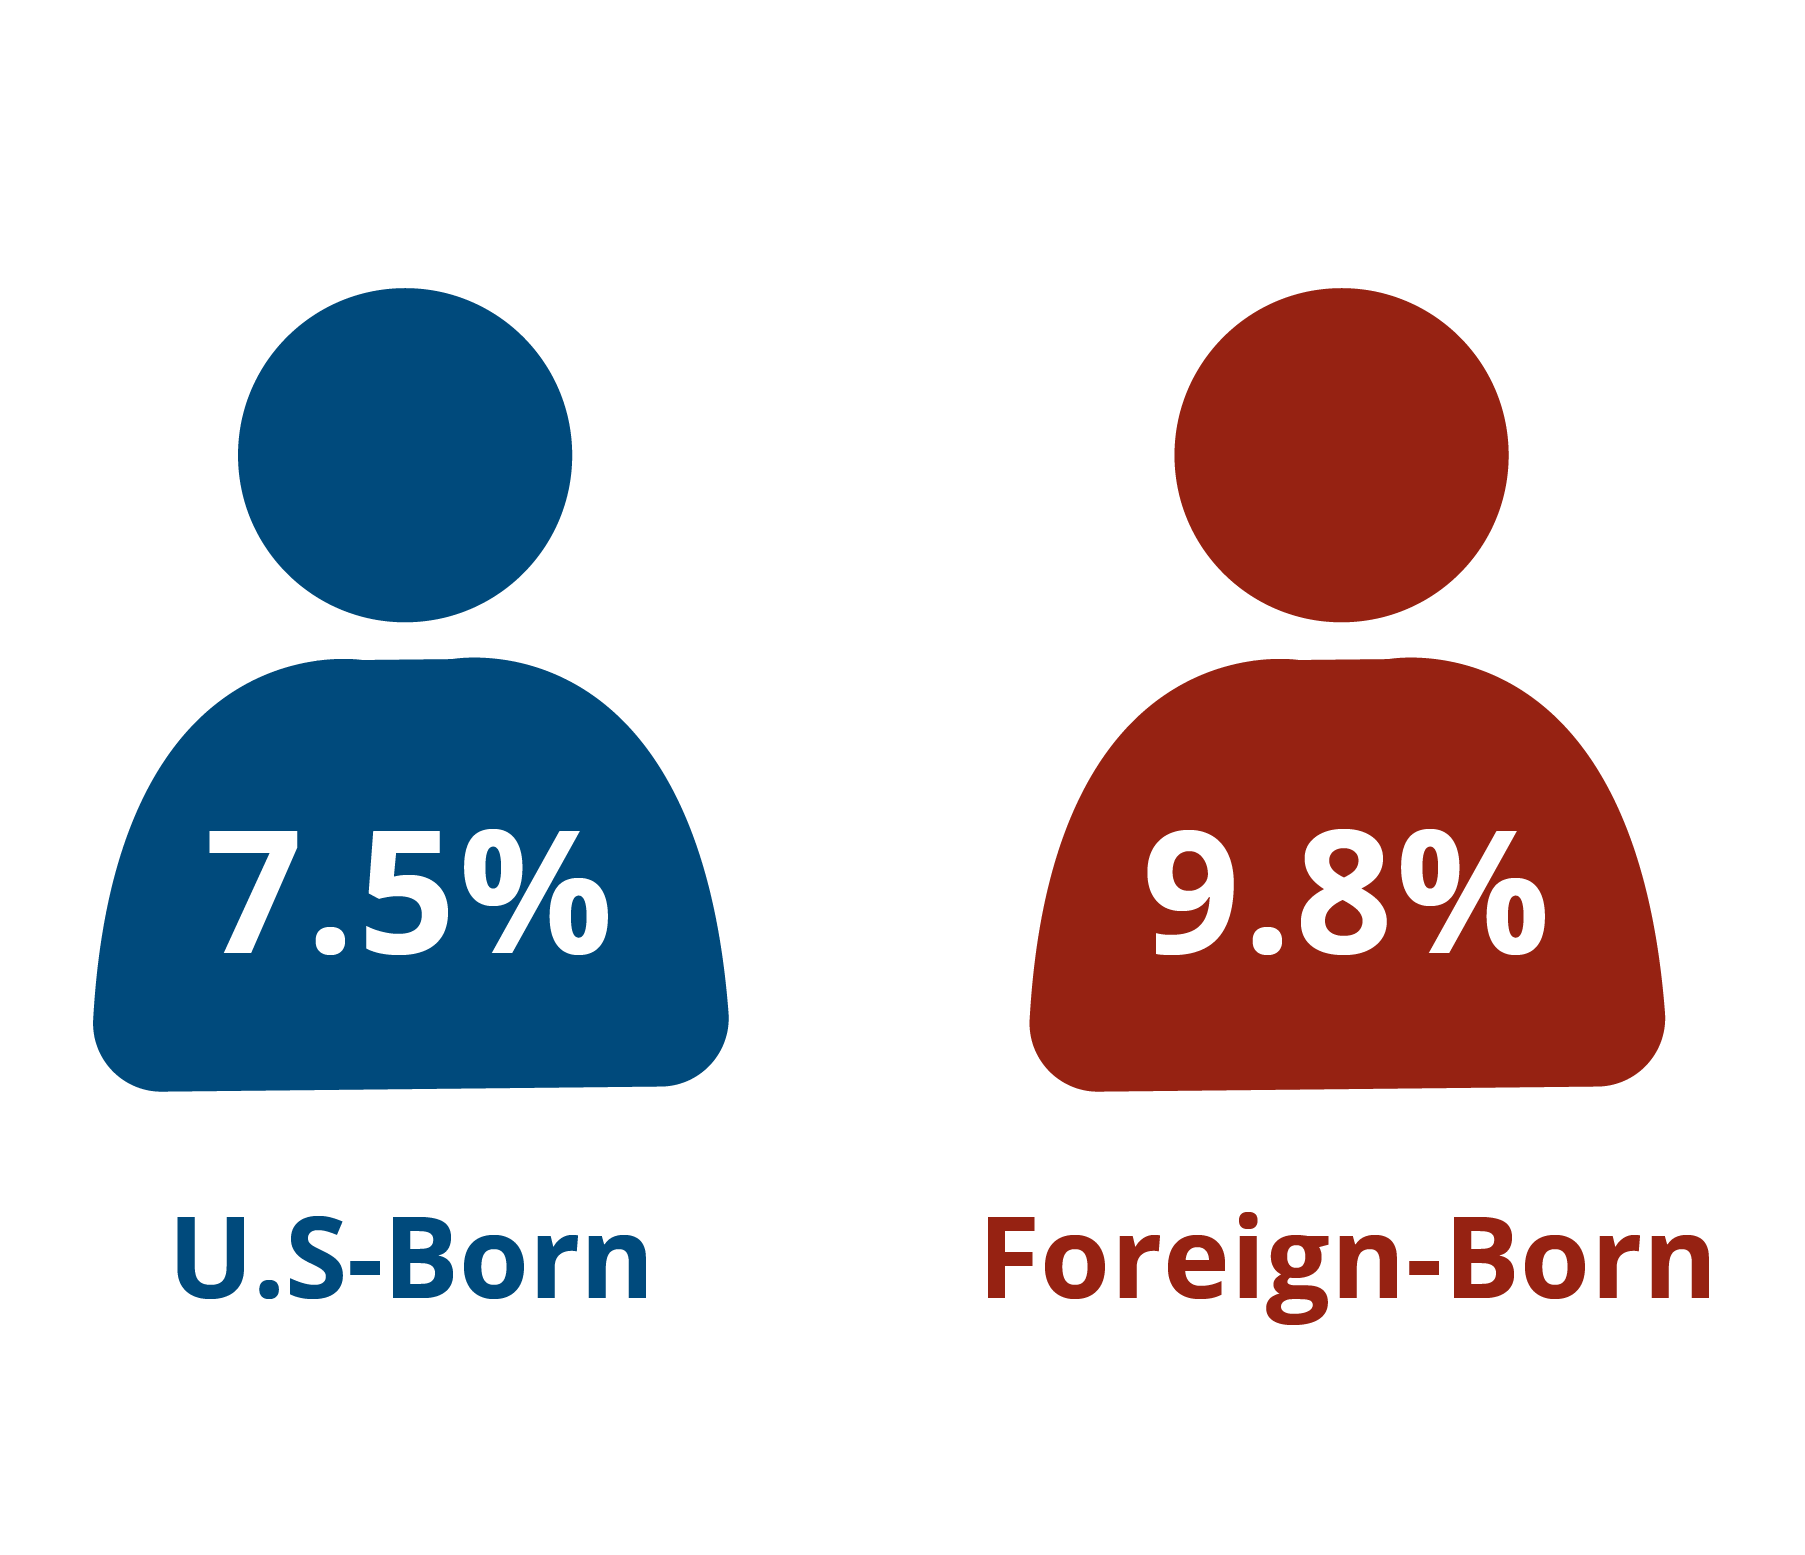 In Massachusetts, 9.8% of immigrants are self-employed, while 7.5% of U.S.-born residents are self-employed.